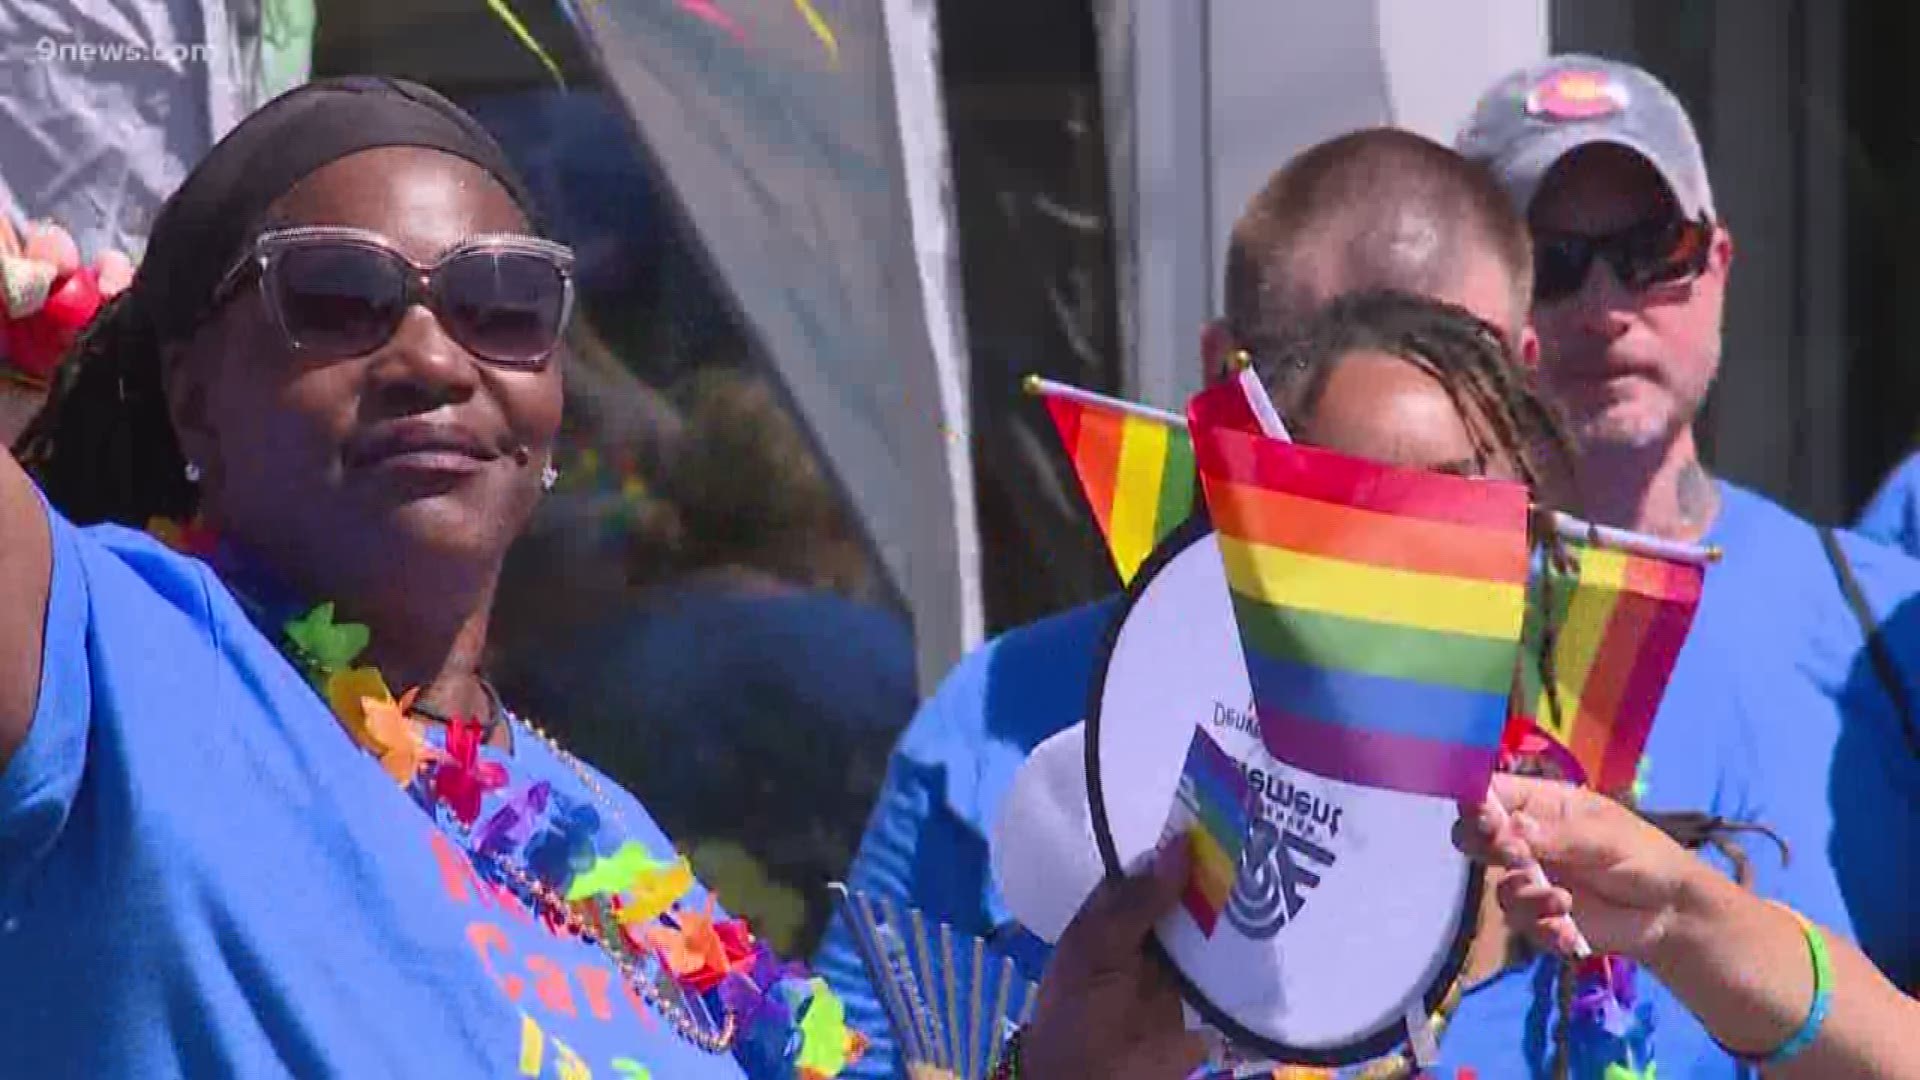 Denver PrideFest parade took place Sunday morning, part of the weekend-long annual event.